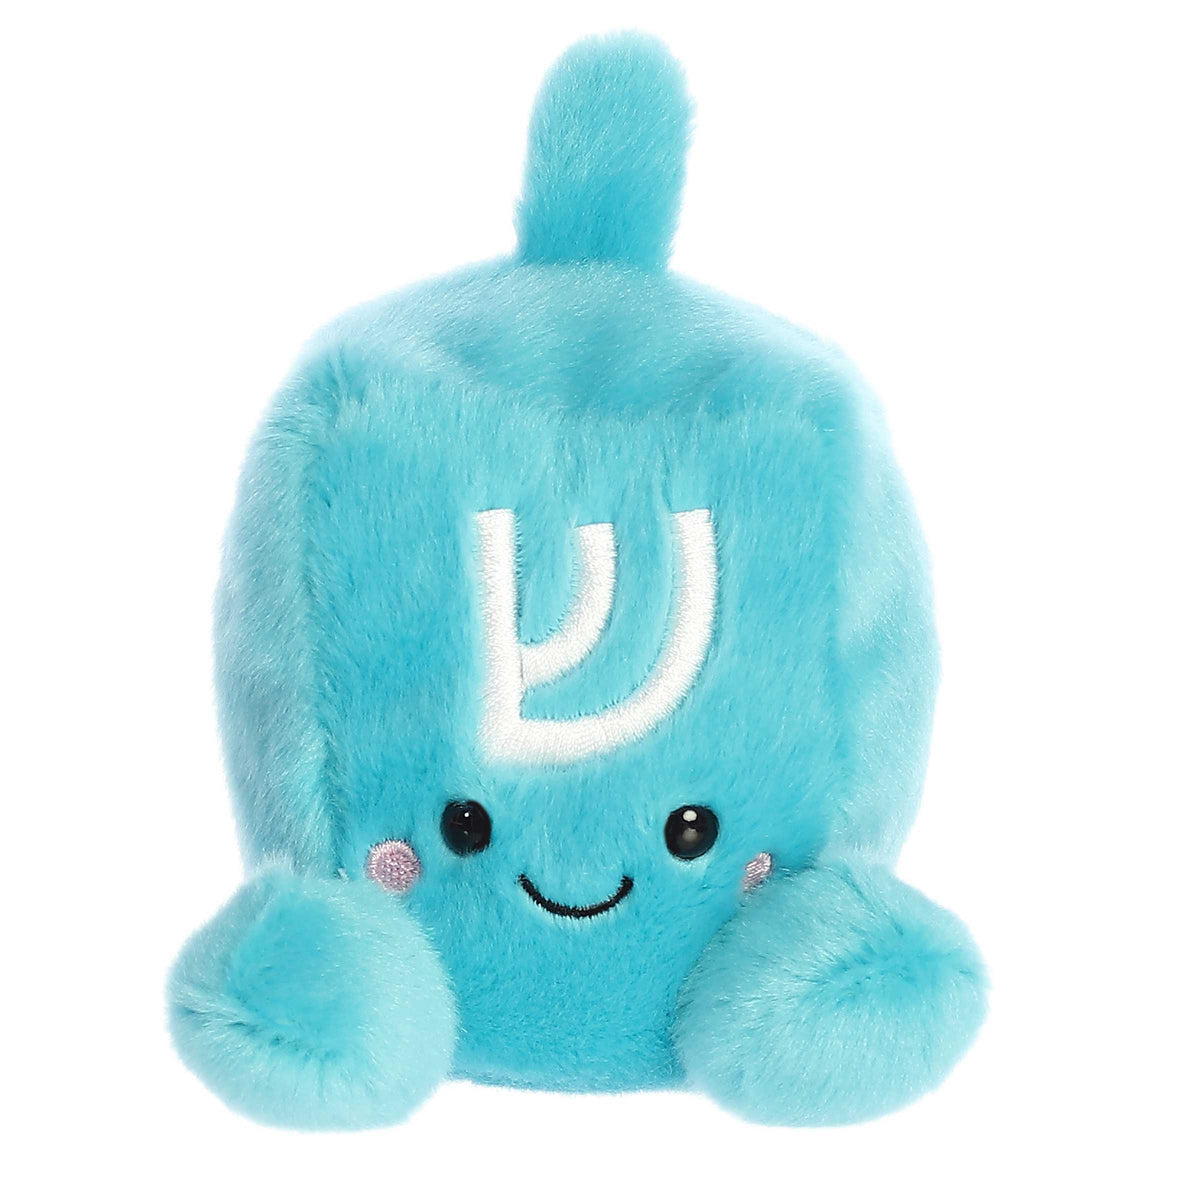 Adorable, happy, mini blue dreidel plush toy sitting with Hebrew letters embroidered on each side